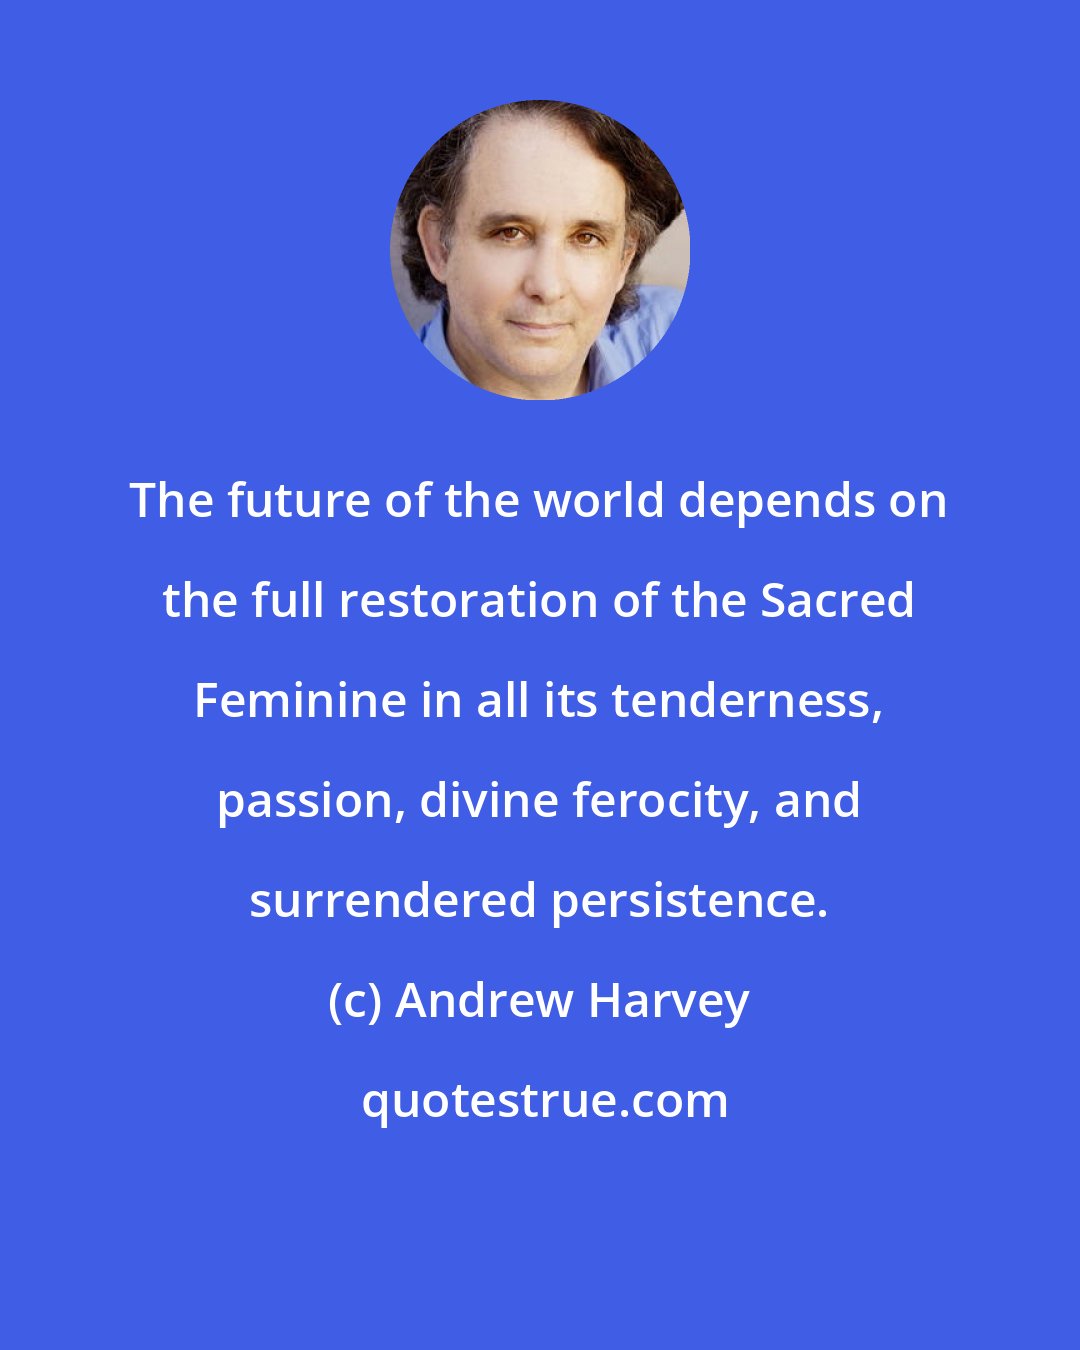 Andrew Harvey: The future of the world depends on the full restoration of the Sacred Feminine in all its tenderness, passion, divine ferocity, and surrendered persistence.